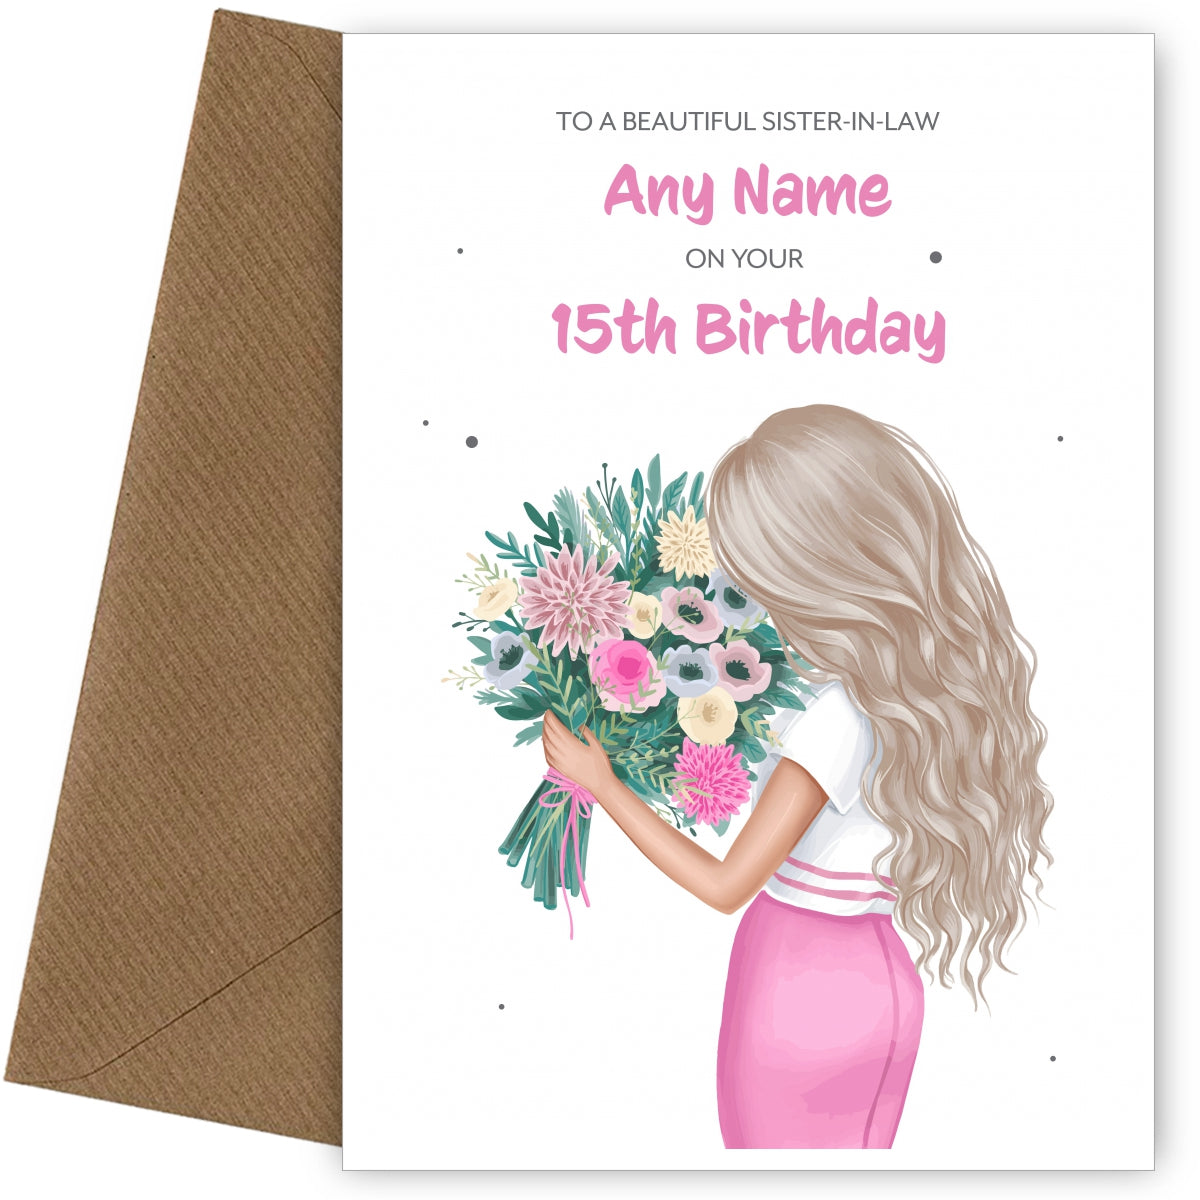 15th Birthday Card for Sister-in-law - Beautiful Blonde